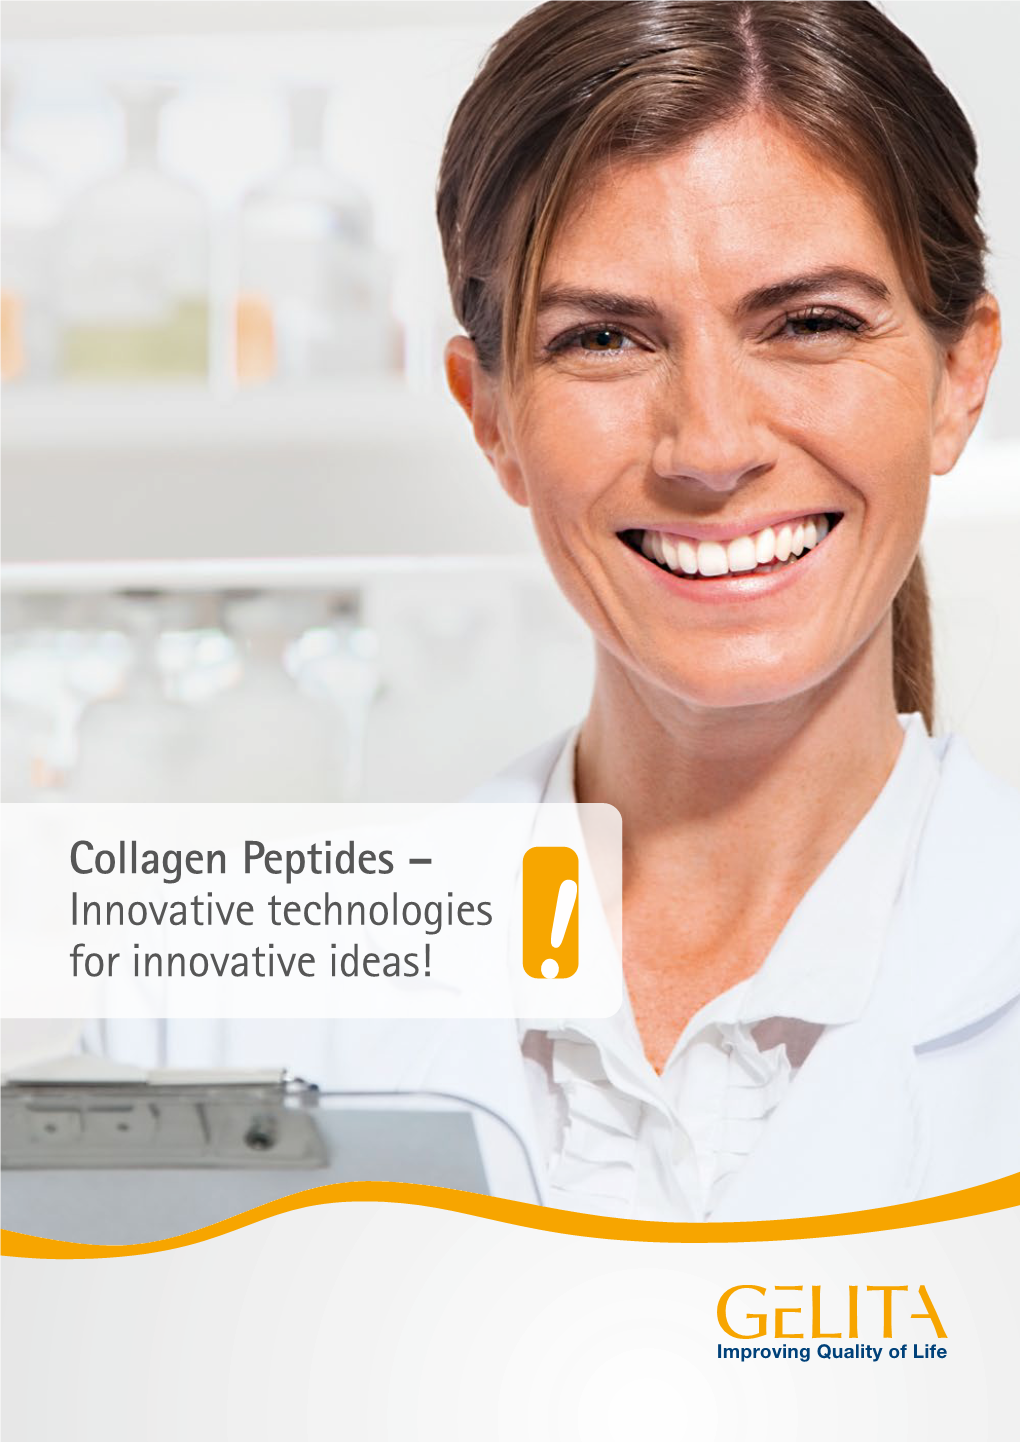 Collagen Peptides – Innovative Technologies for Innovative Ideas! What Are Collagen Peptides?